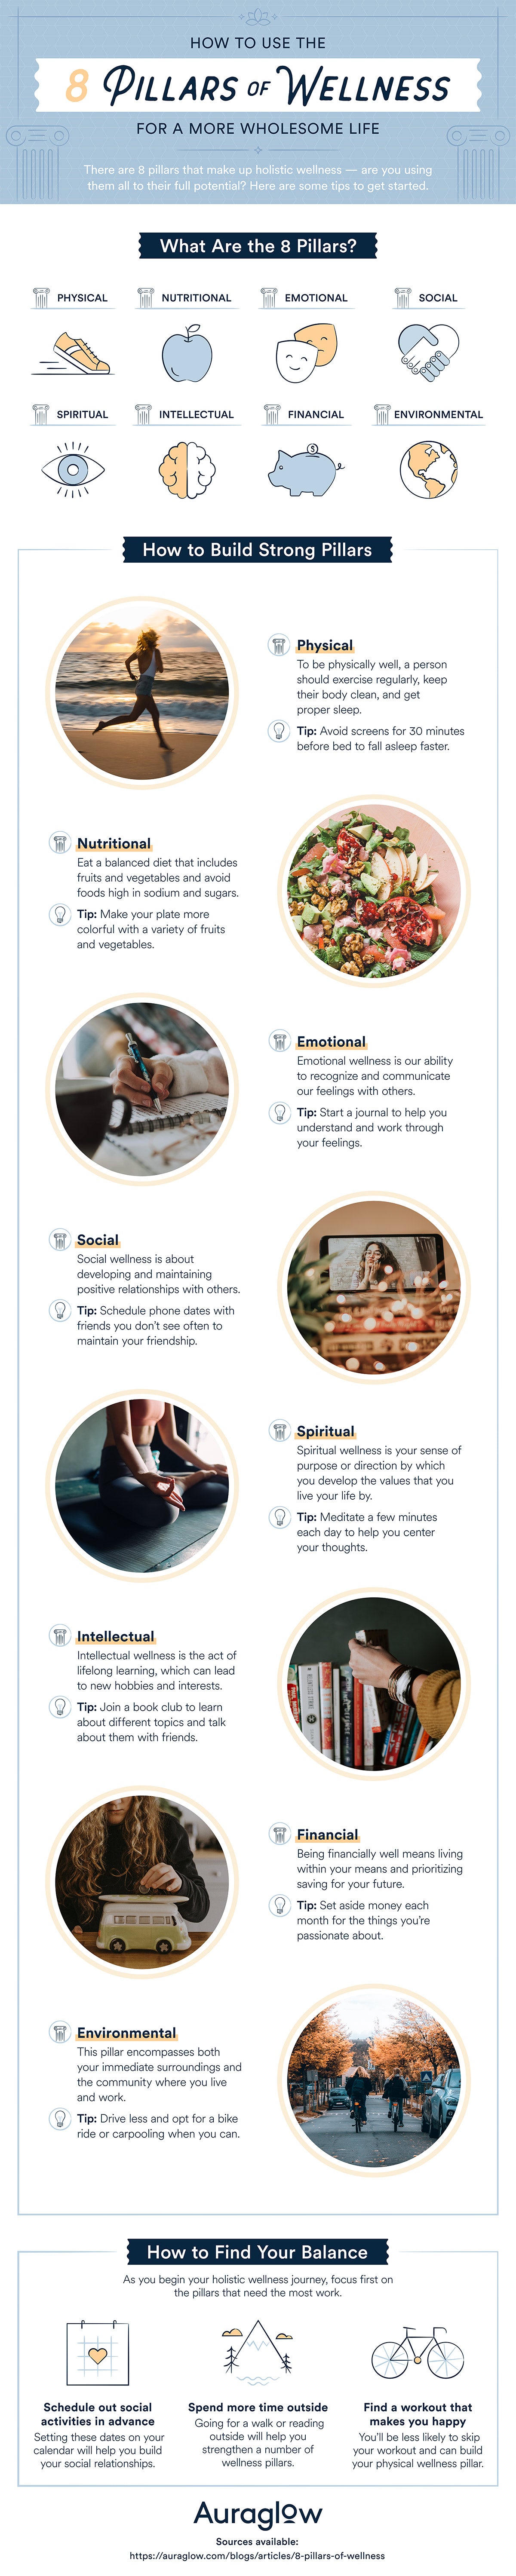 How to Harness the 8 Pillars of Wellness for a Healthier You  - The 8 Pillars of Wellness are the categories of wellness that make up a healthy person.  The 8 Pillars of Wellness include: physical, nutritional, social, financial, environmental, emotional, spiritual, and intellectual wellness. By prioritizing all of the pillars, you’ll be on your way to becoming a healthier and happier you. #health #healthylifestyle  #wellness  #pillarsofwellness  #healthyliving  #balancedlifestyle  #healthyperson  #healthandwellness 